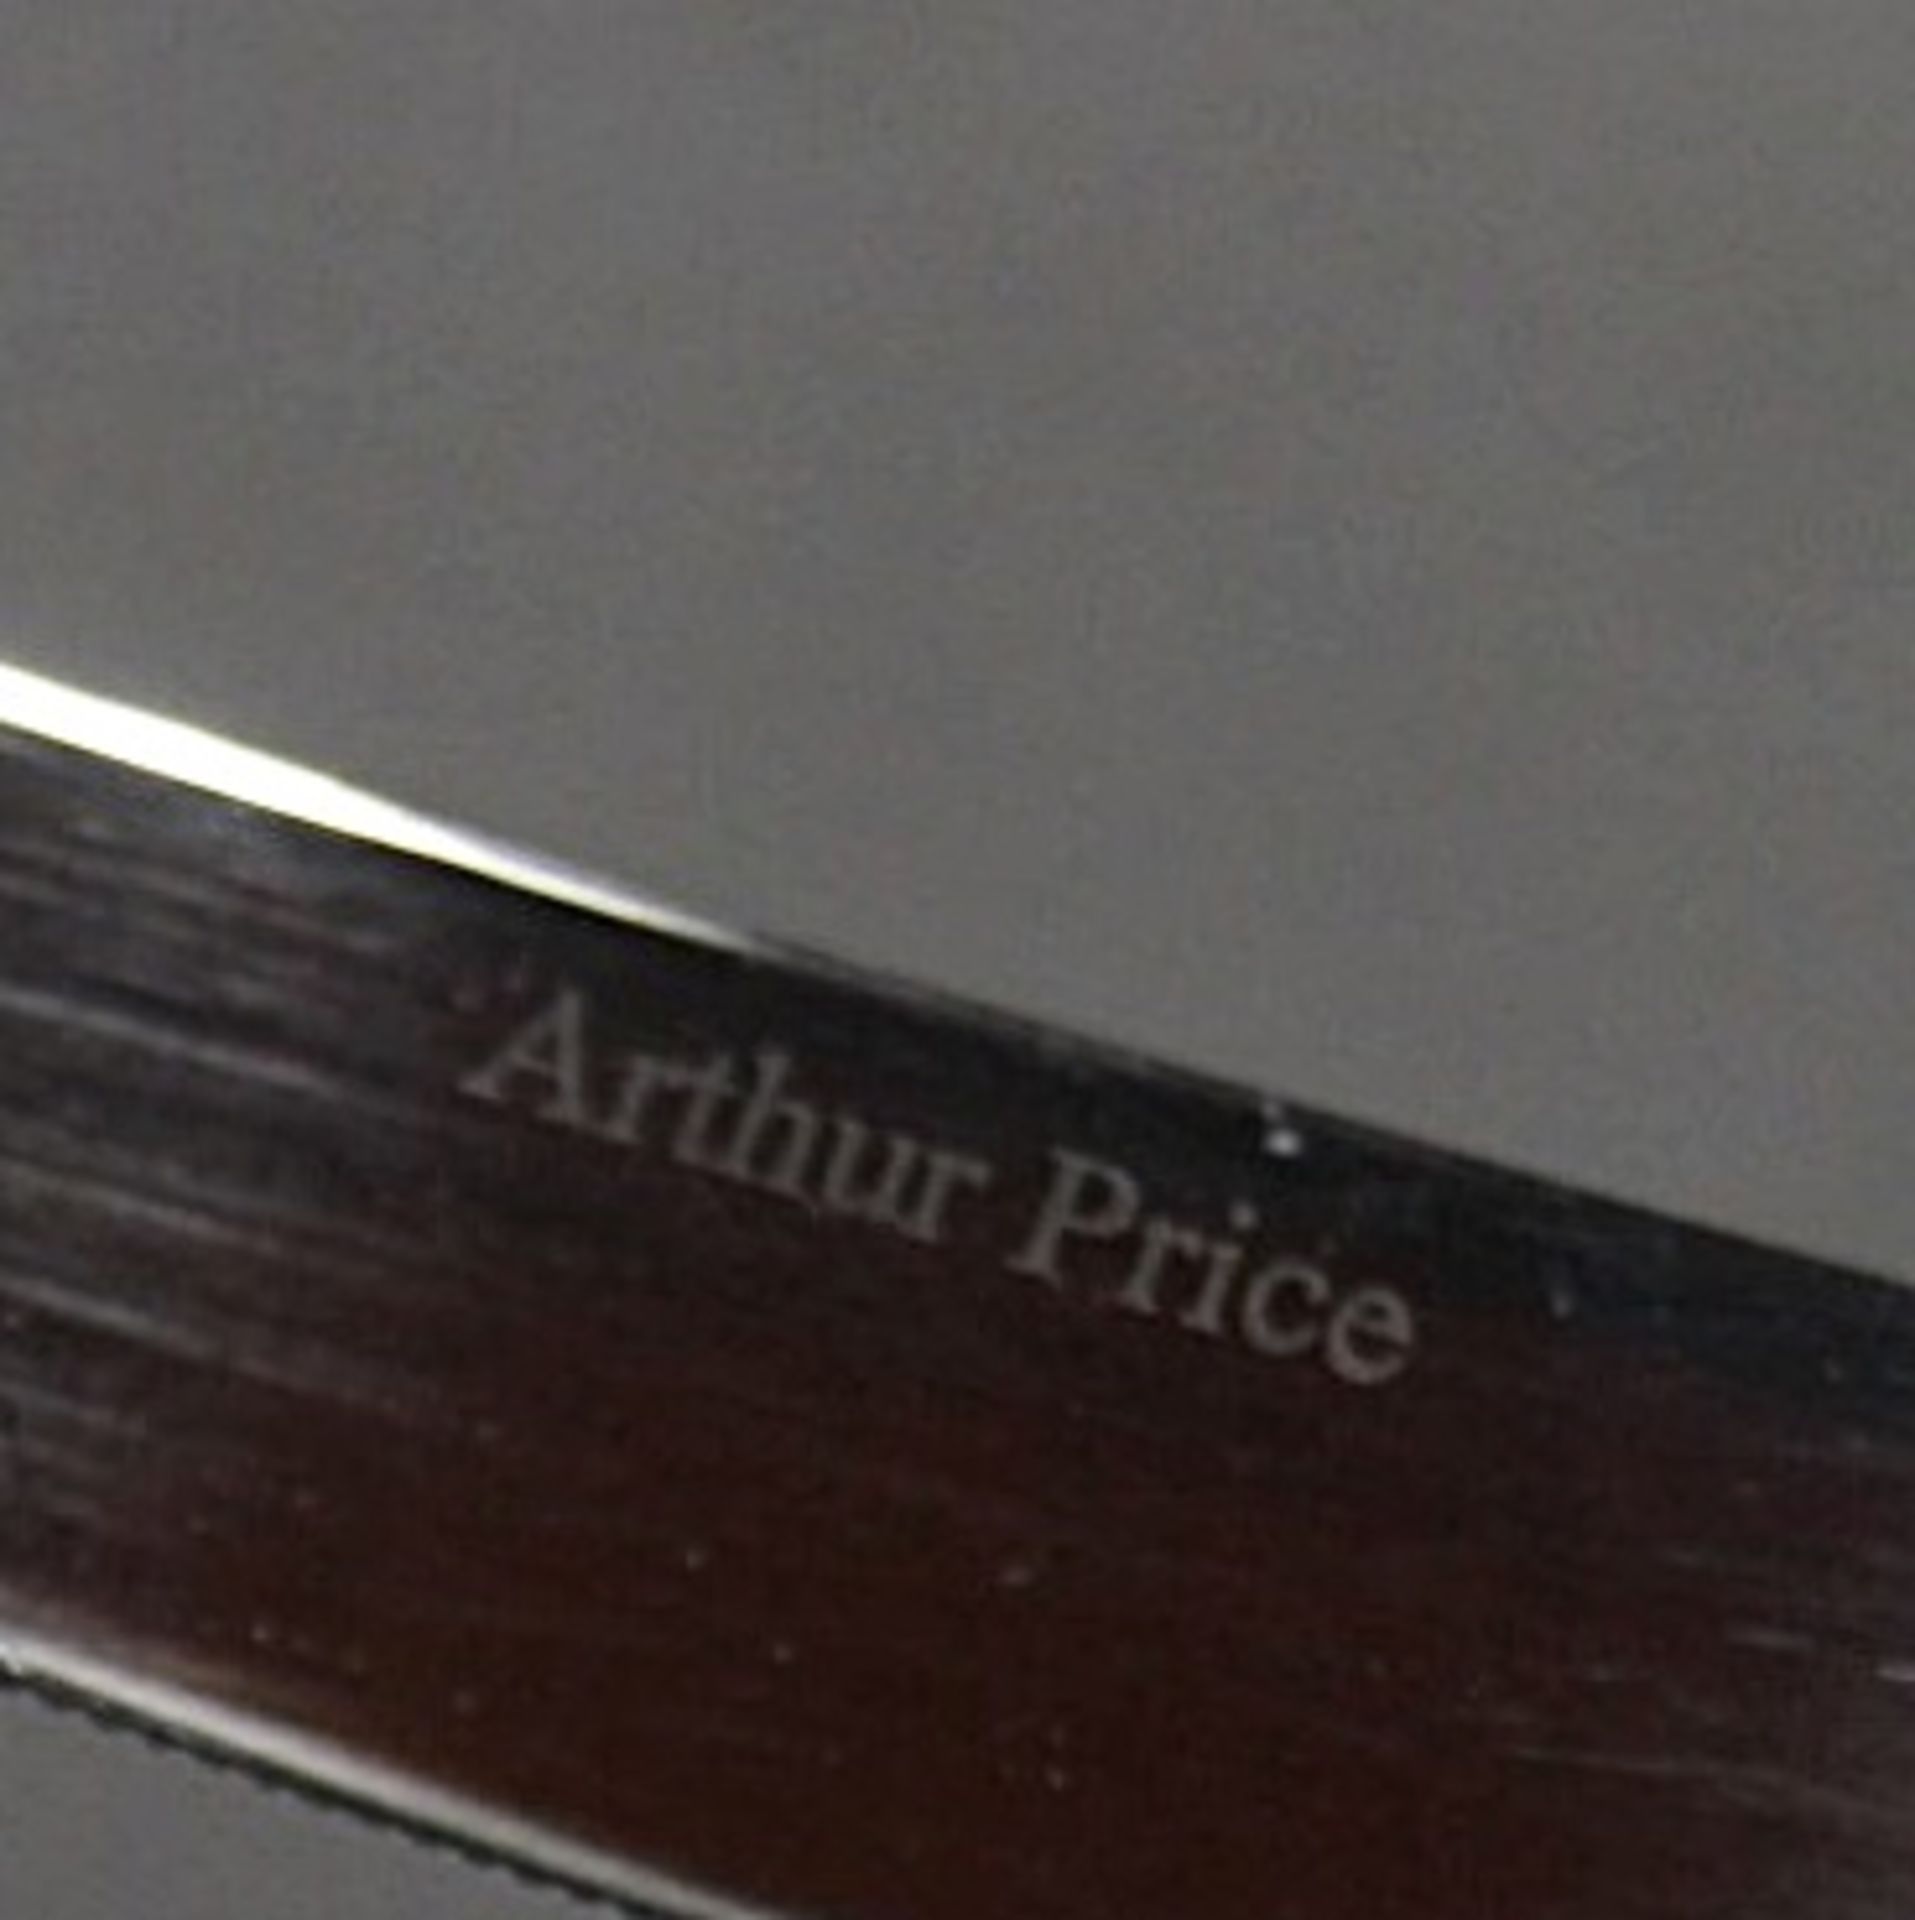 15 x Pieces Of ARTHUR PRICE Stainless Steel Cutlery - Unused Boxed Stock - Ref: HHW328/NOV21/WH2/ - Image 4 of 4